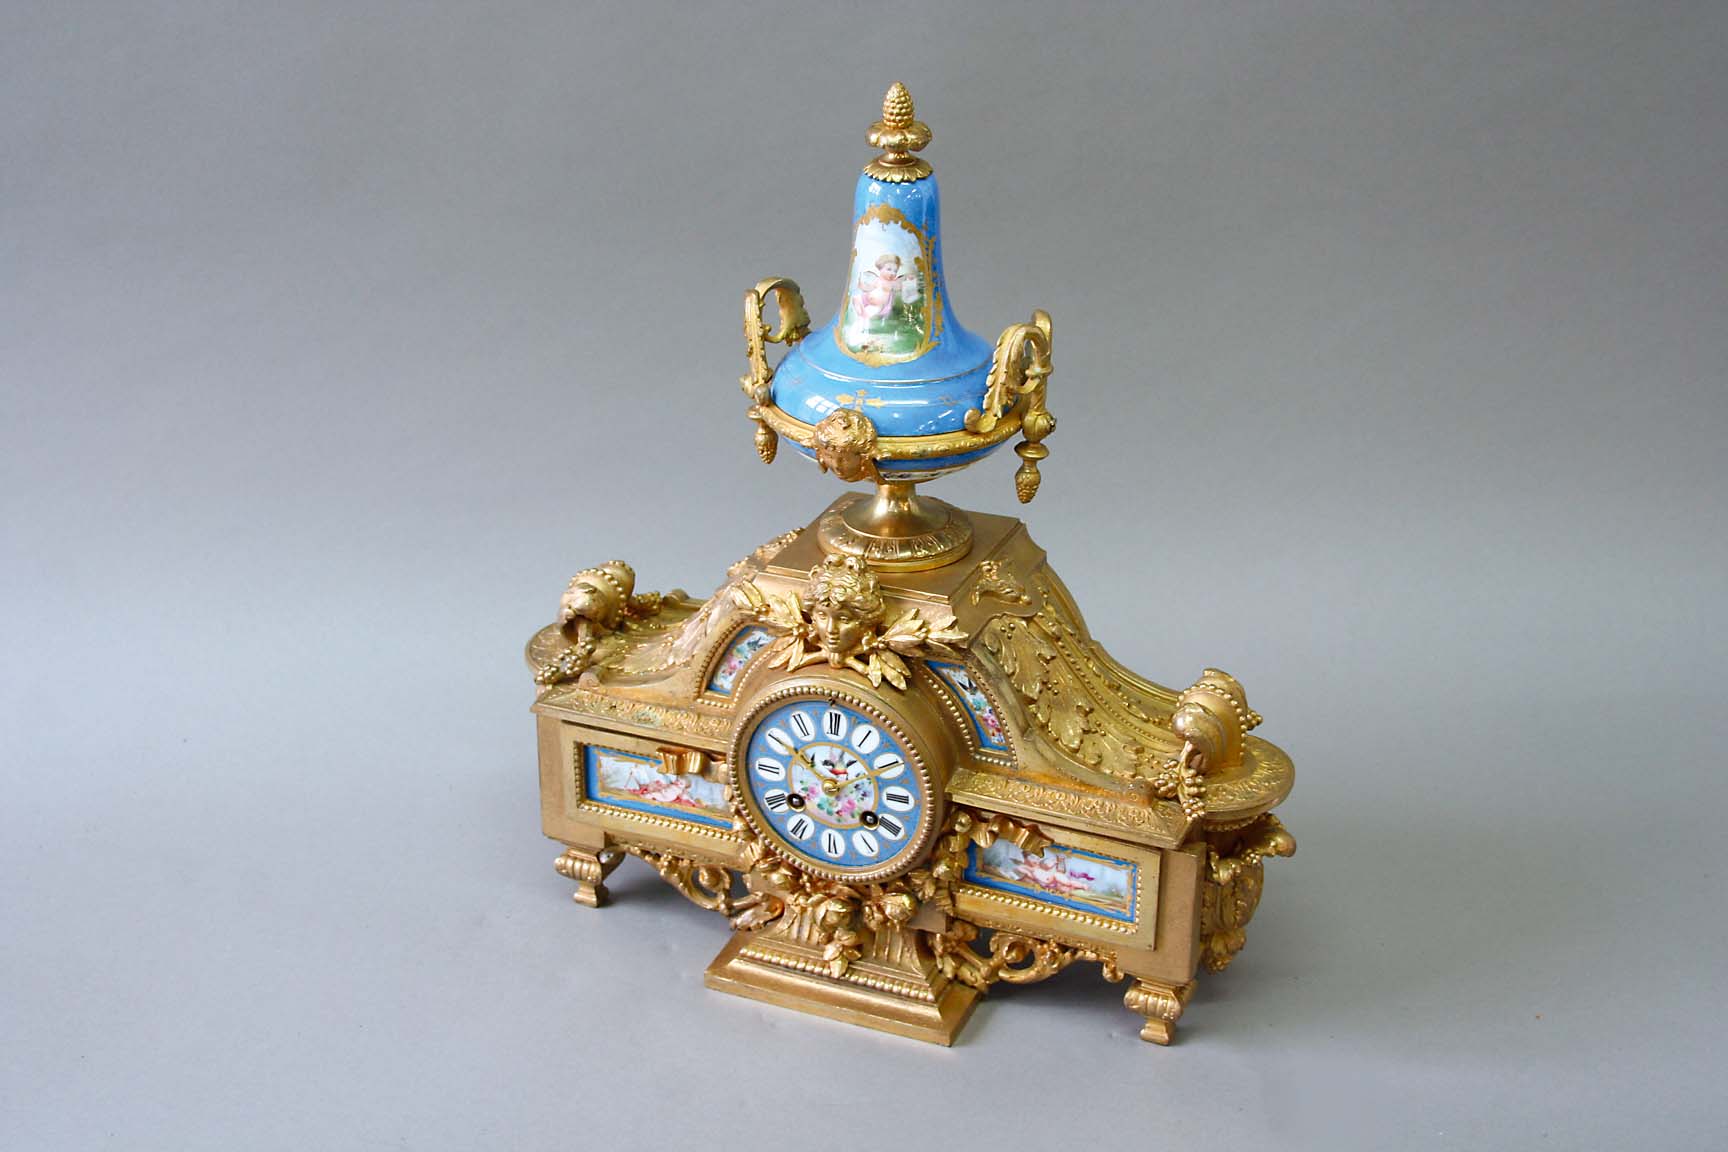 A GILT SPELTER AND TURQUOISE "SEVRES" MANTEL CLOCK dial painted with a central floral and bird